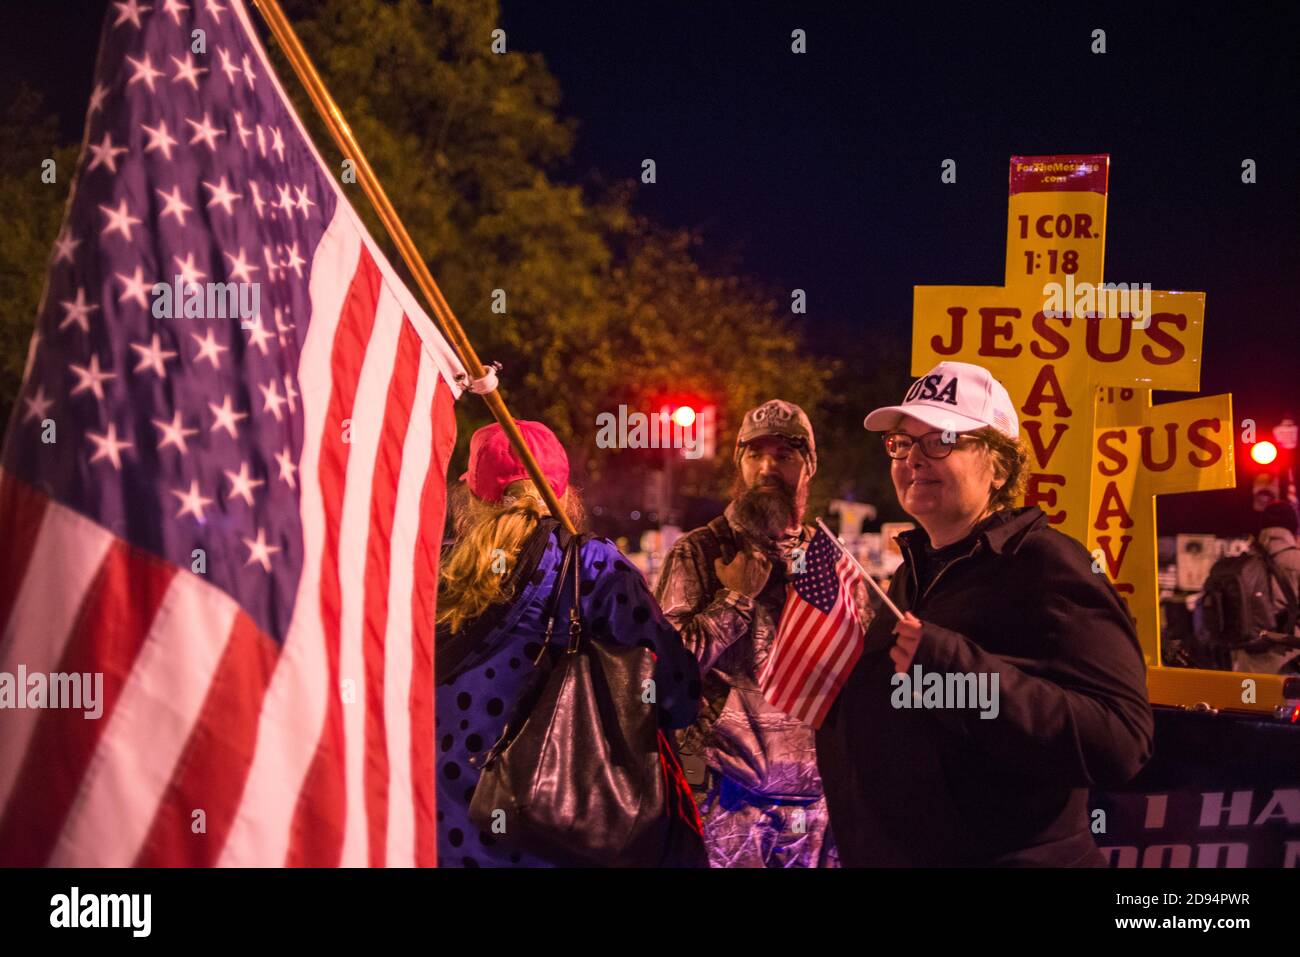 Washington DC, USA, 2nd Nov 2020. Pro America Patriots hold USA flags in support of Trump, amongst activities and other signs, in front of the White House, in the Nation's Capitol,  the night before election day 2020 in USA. Credit: Yuriy Zahvoyskyy / Alamy Live News. Stock Photo